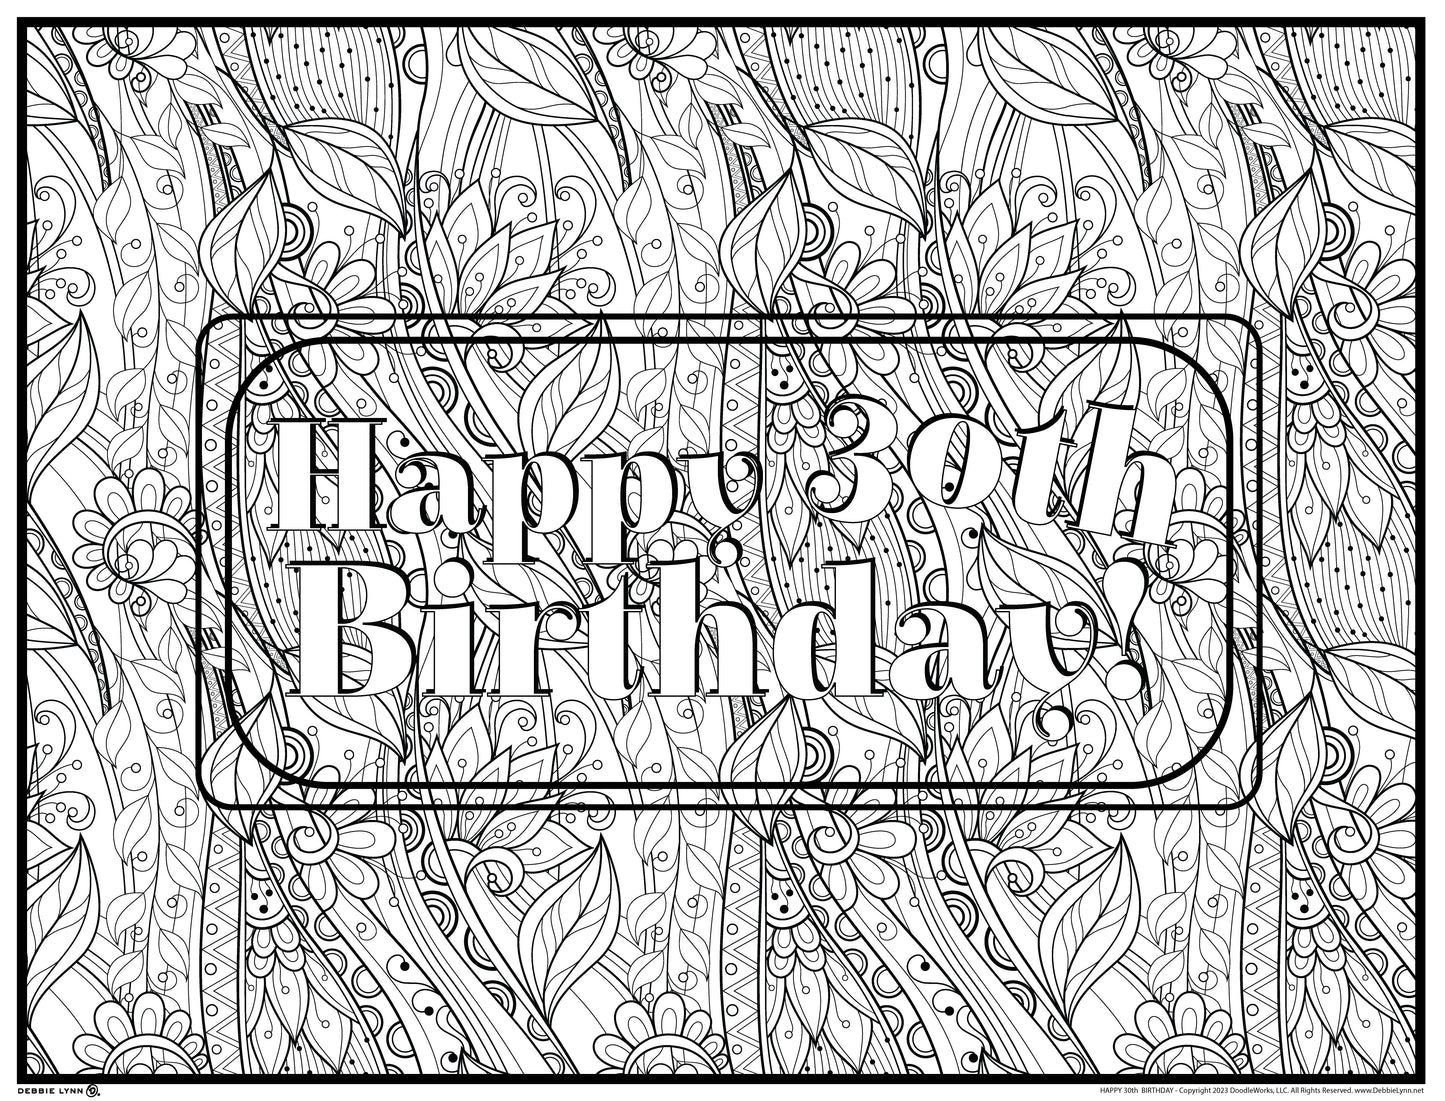 Happy 30 Personalized Giant Coloring Poster 46"x60"